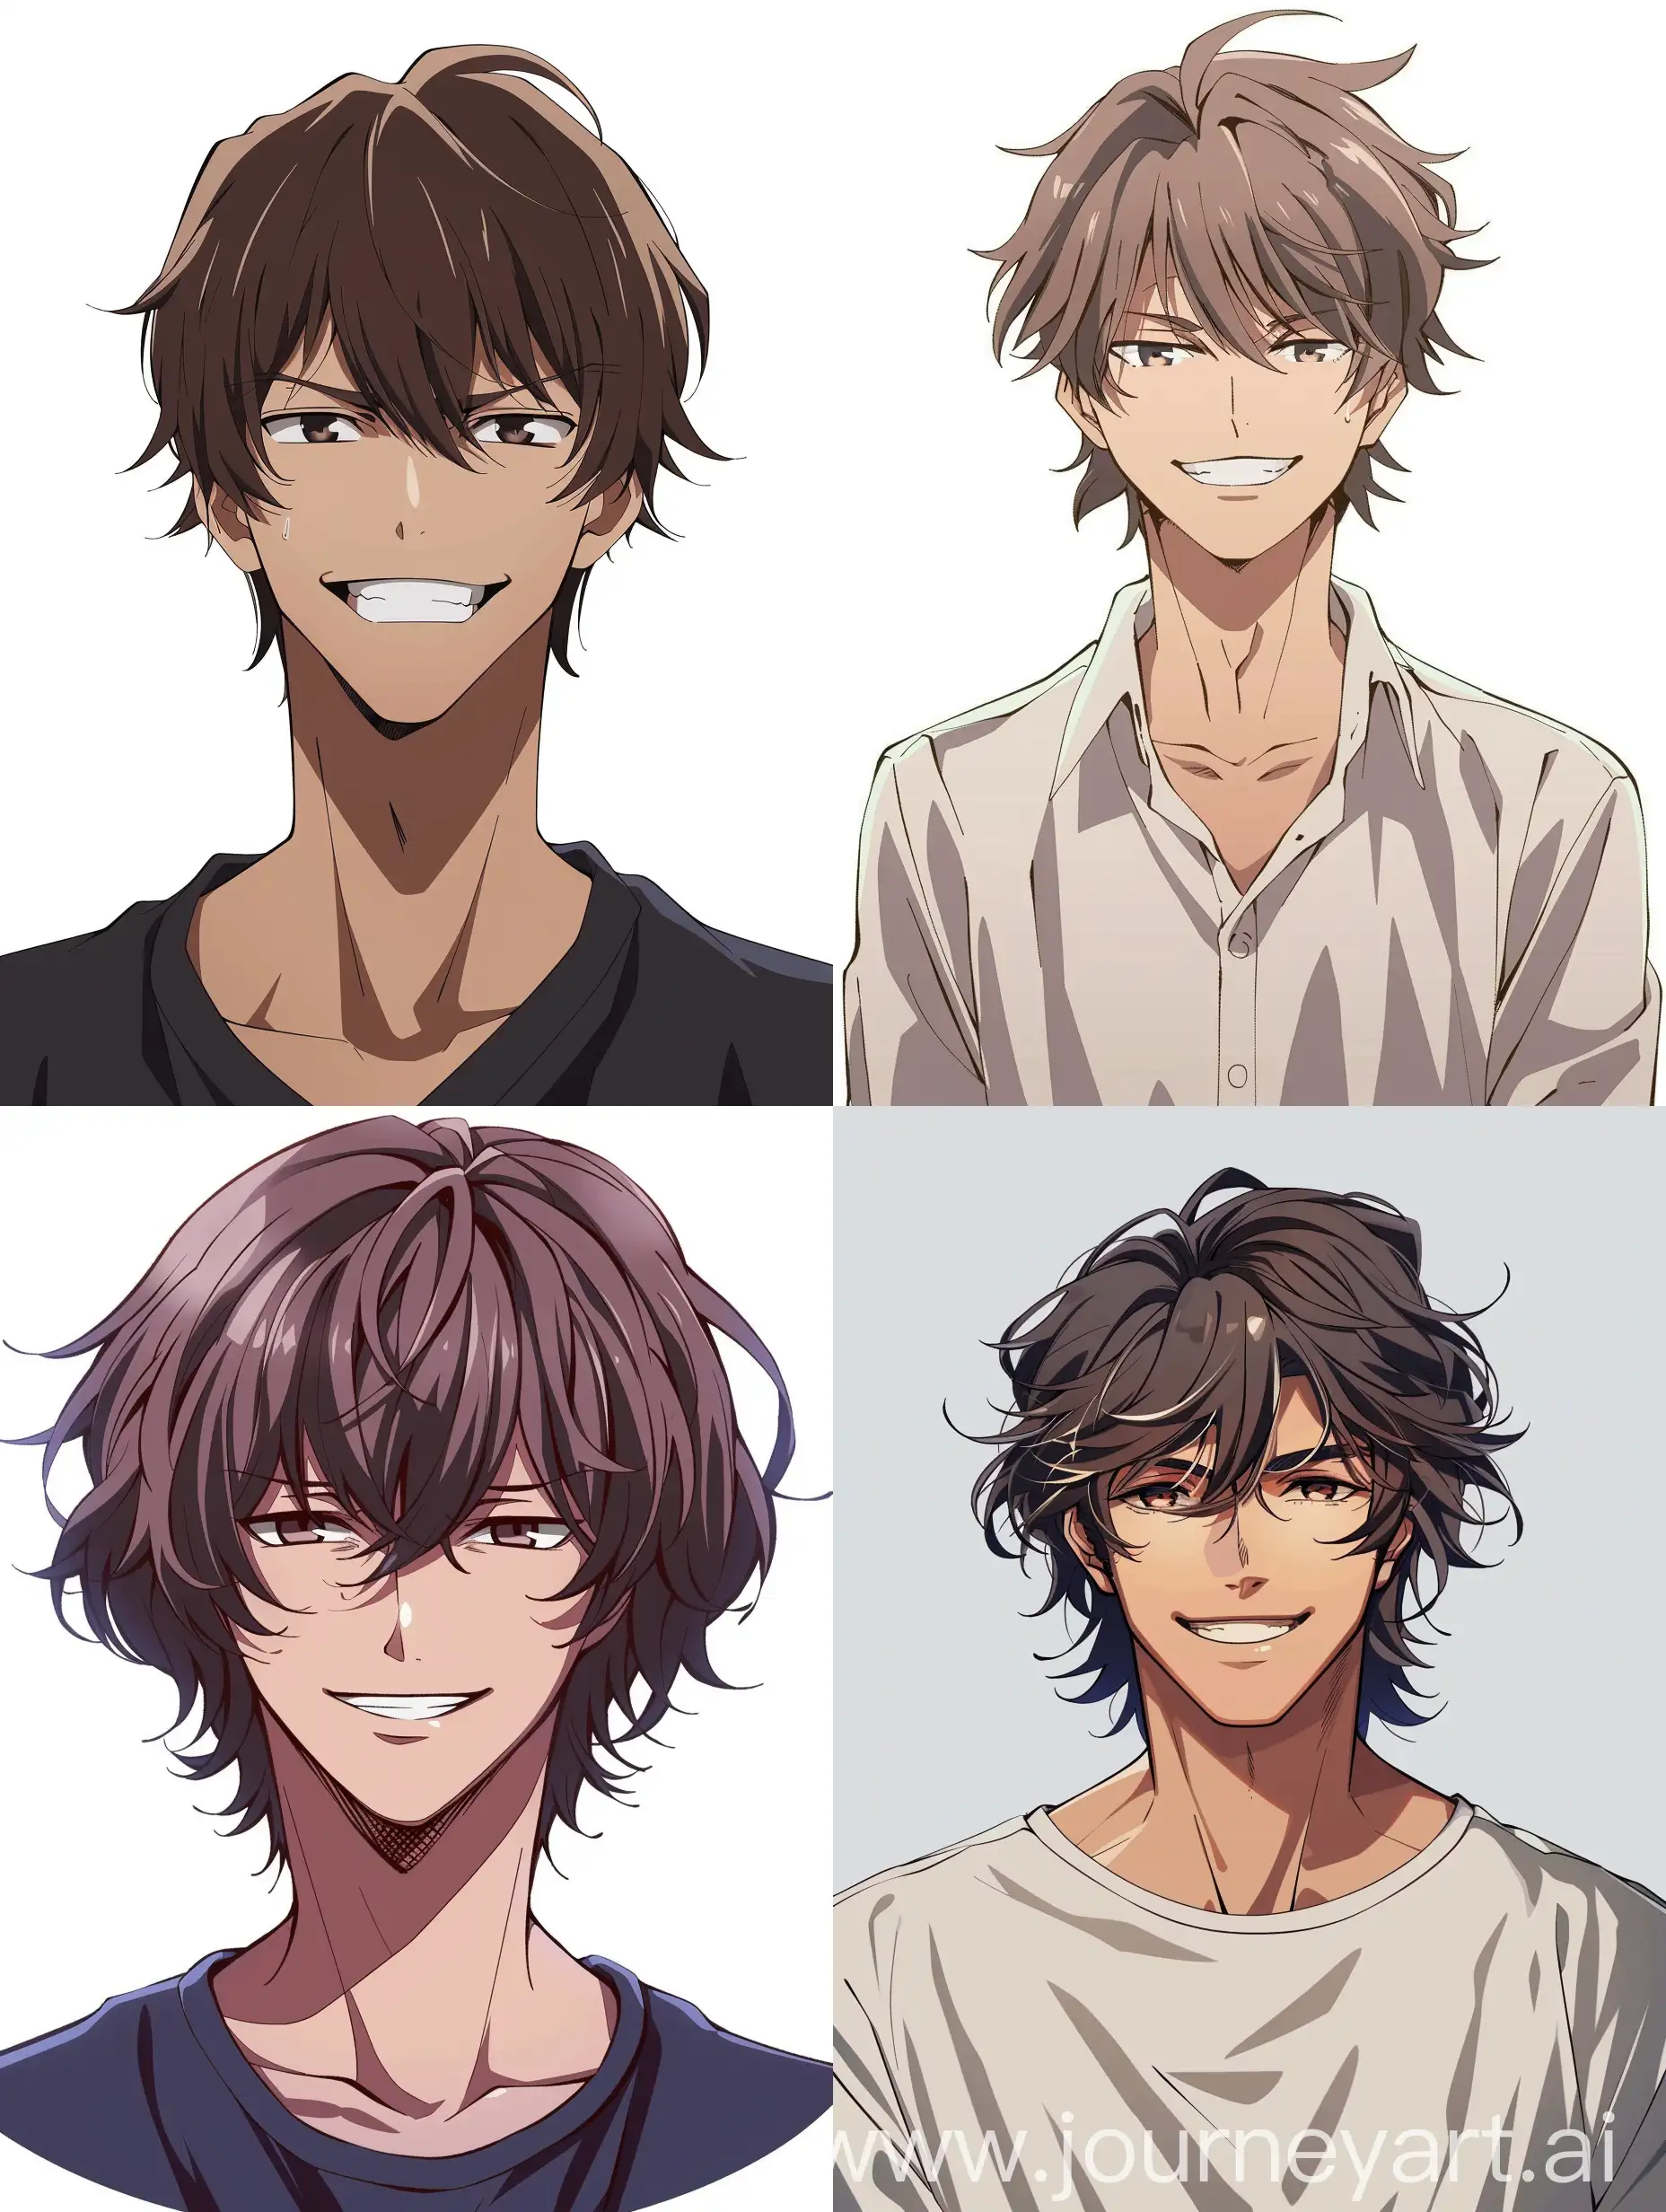 A male anime character smiling with confidence and seriousness, just a head.